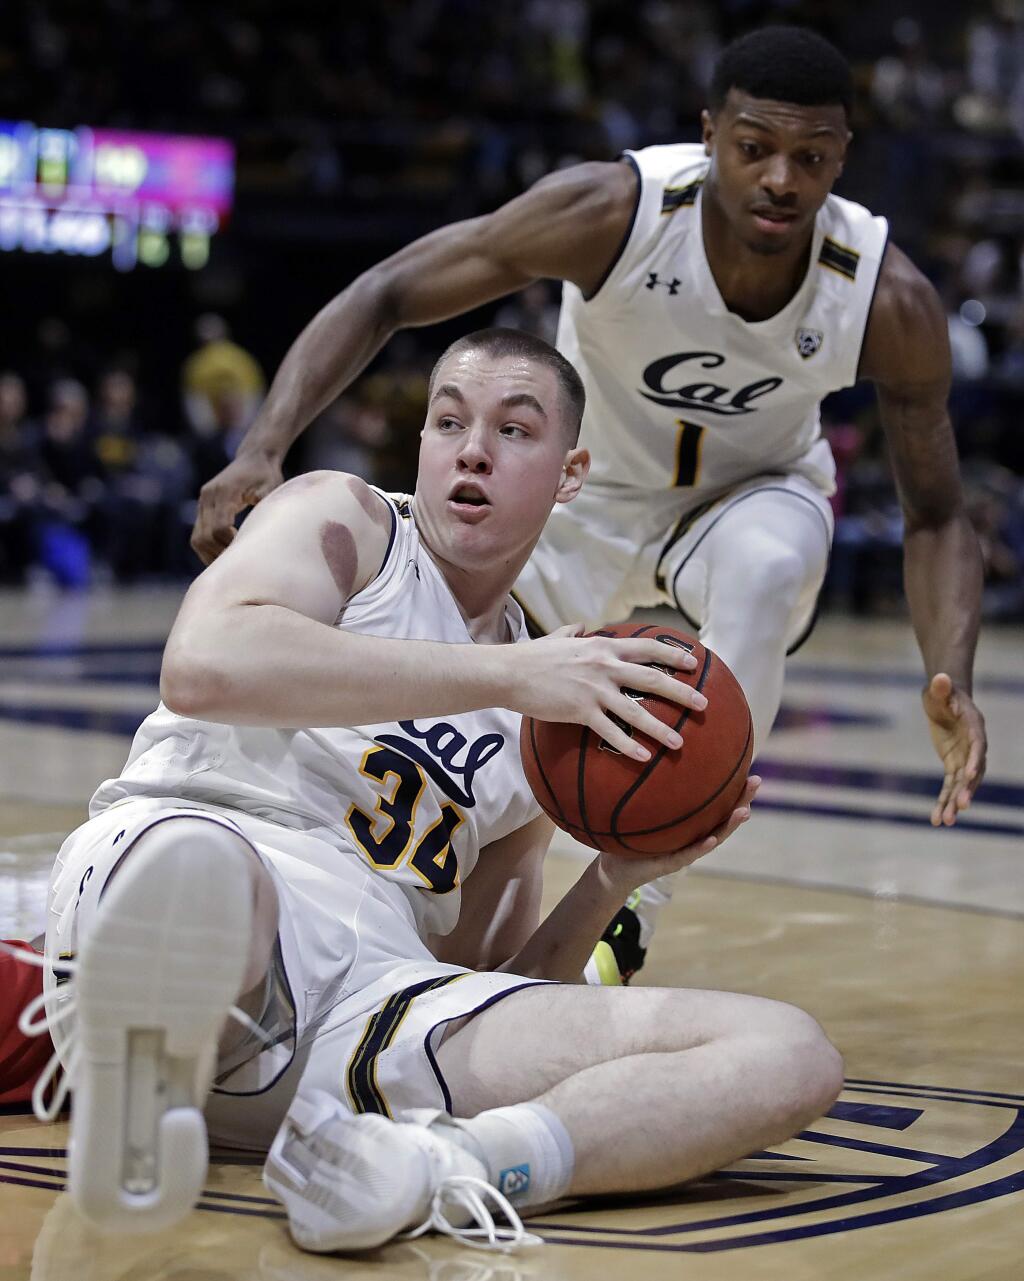 Cal's Grant Anticevich (34) looks to pass from the floor during the first half against USC on Saturday, Feb. 16, 2019, in Berkeley. (AP Photo/Ben Margot)